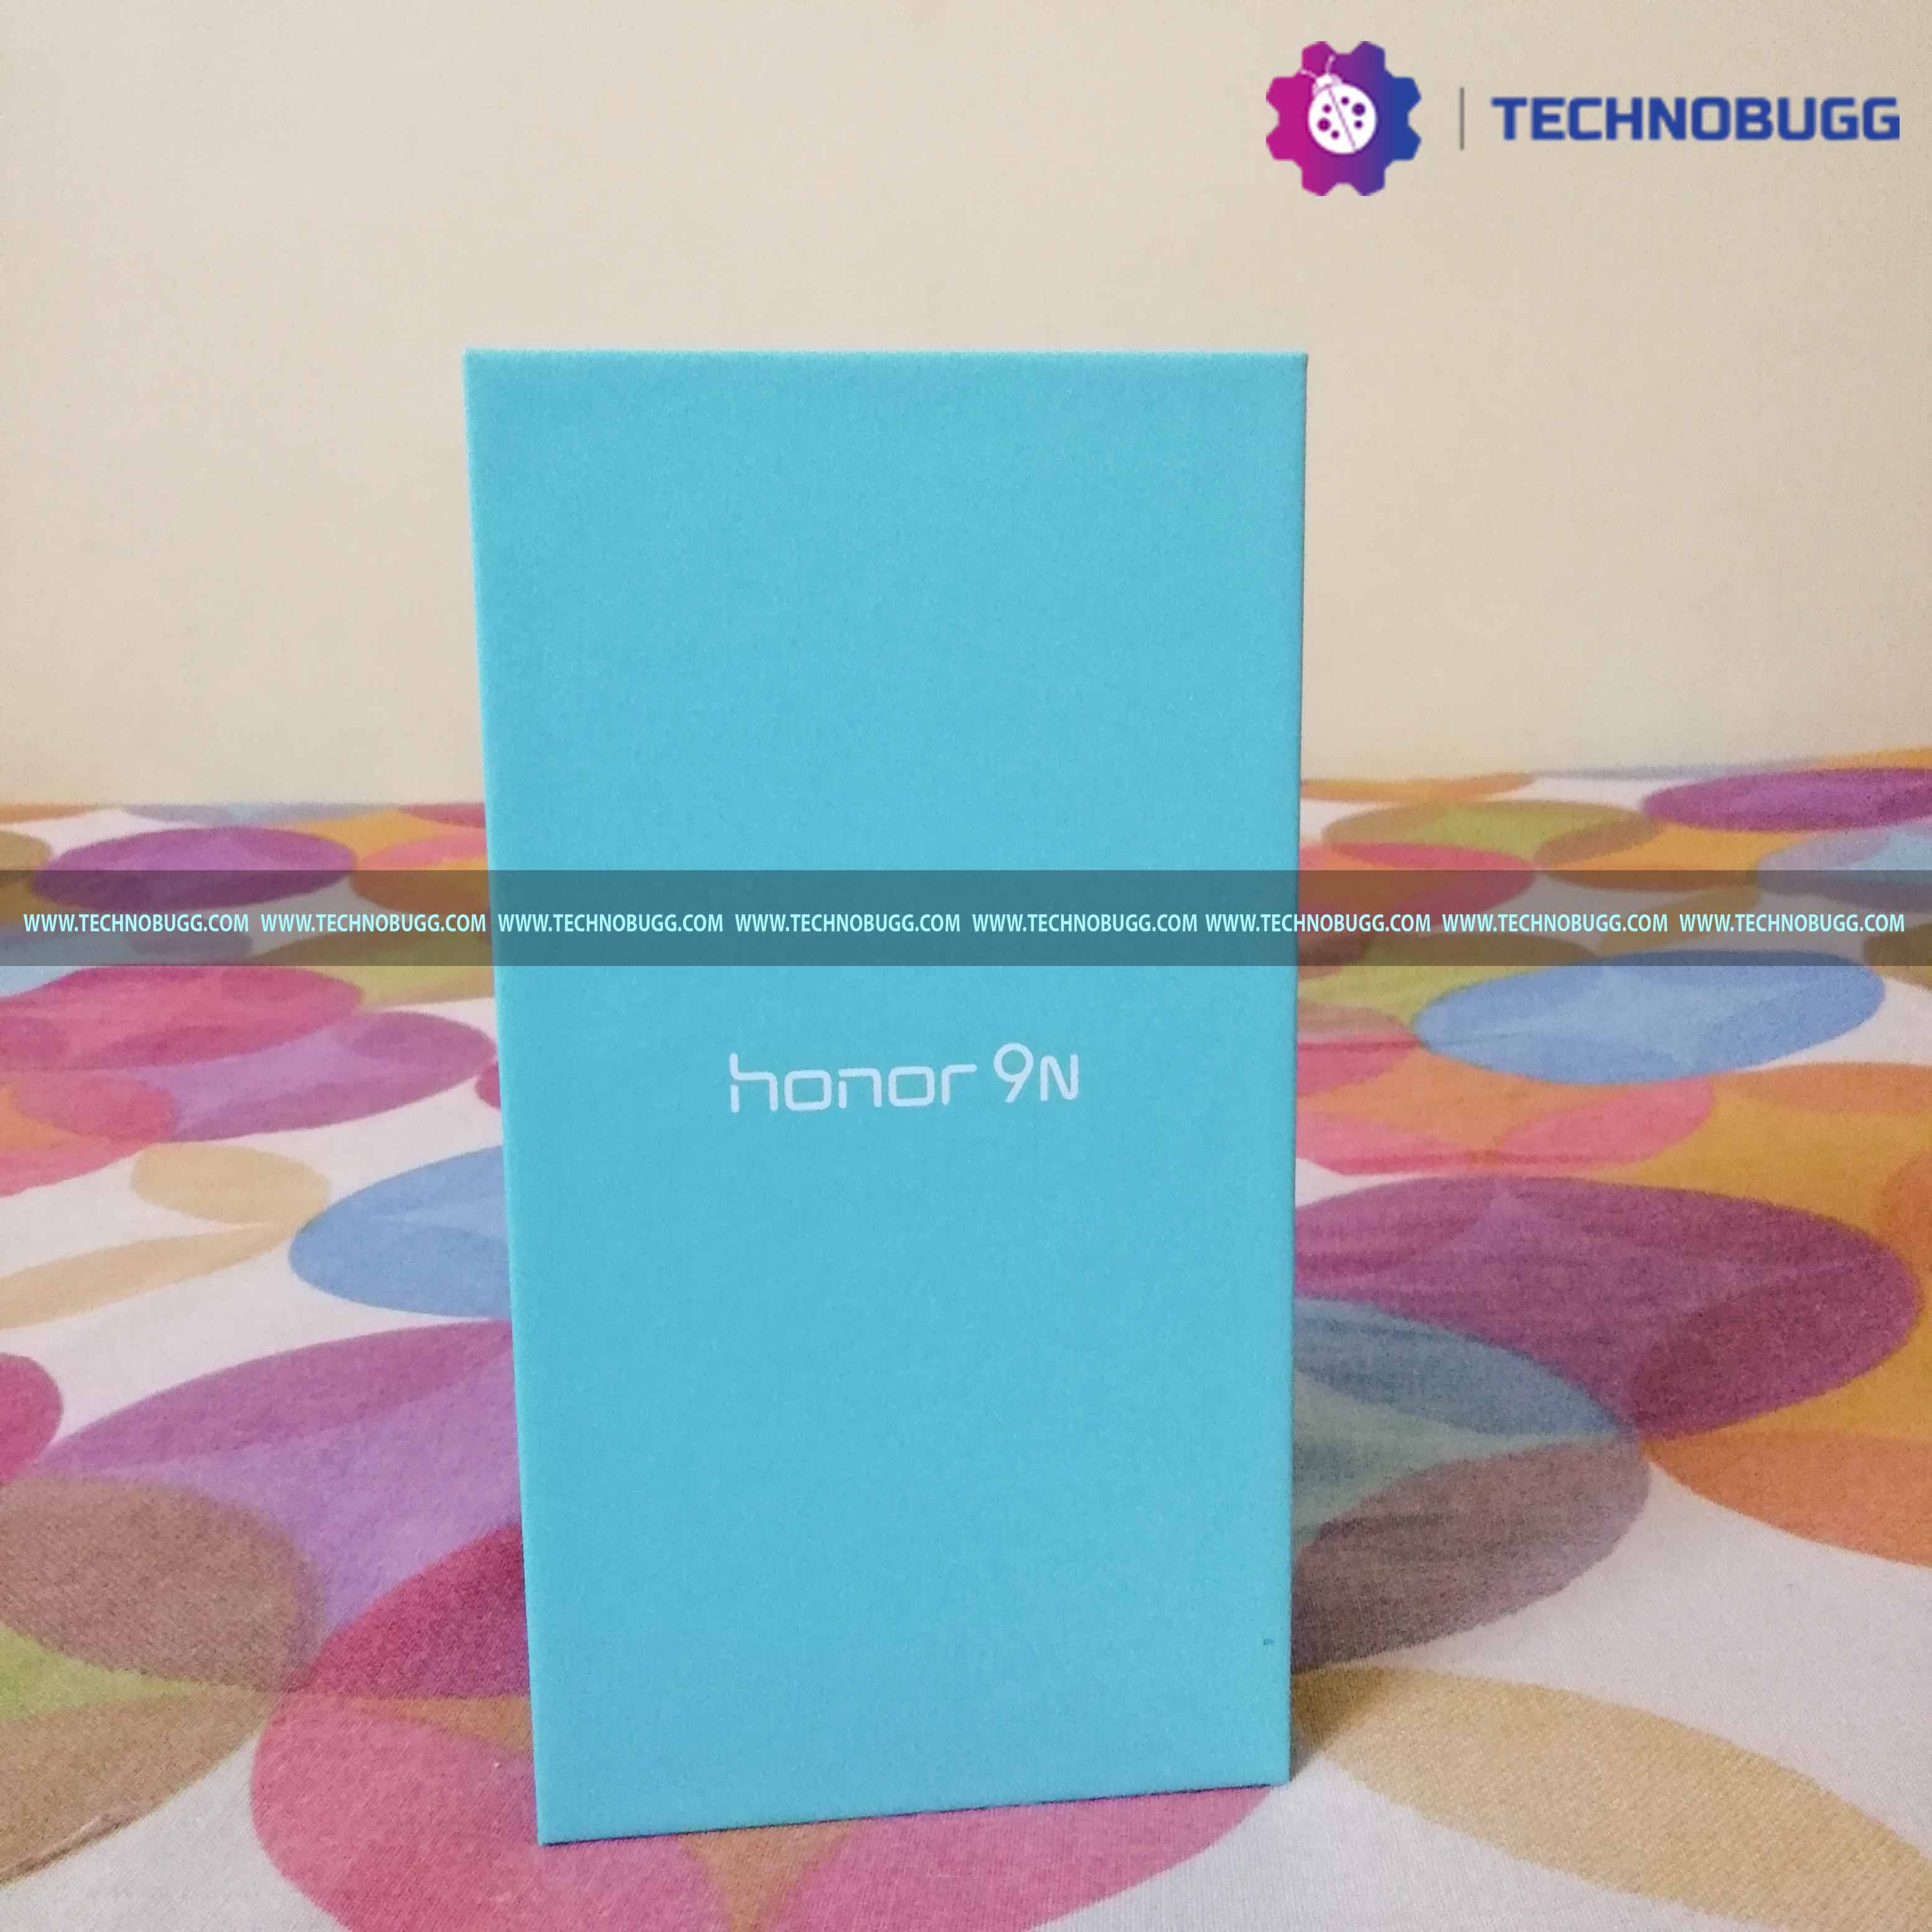 Honor 9N Review: The Premium Smartphone In Budget Class